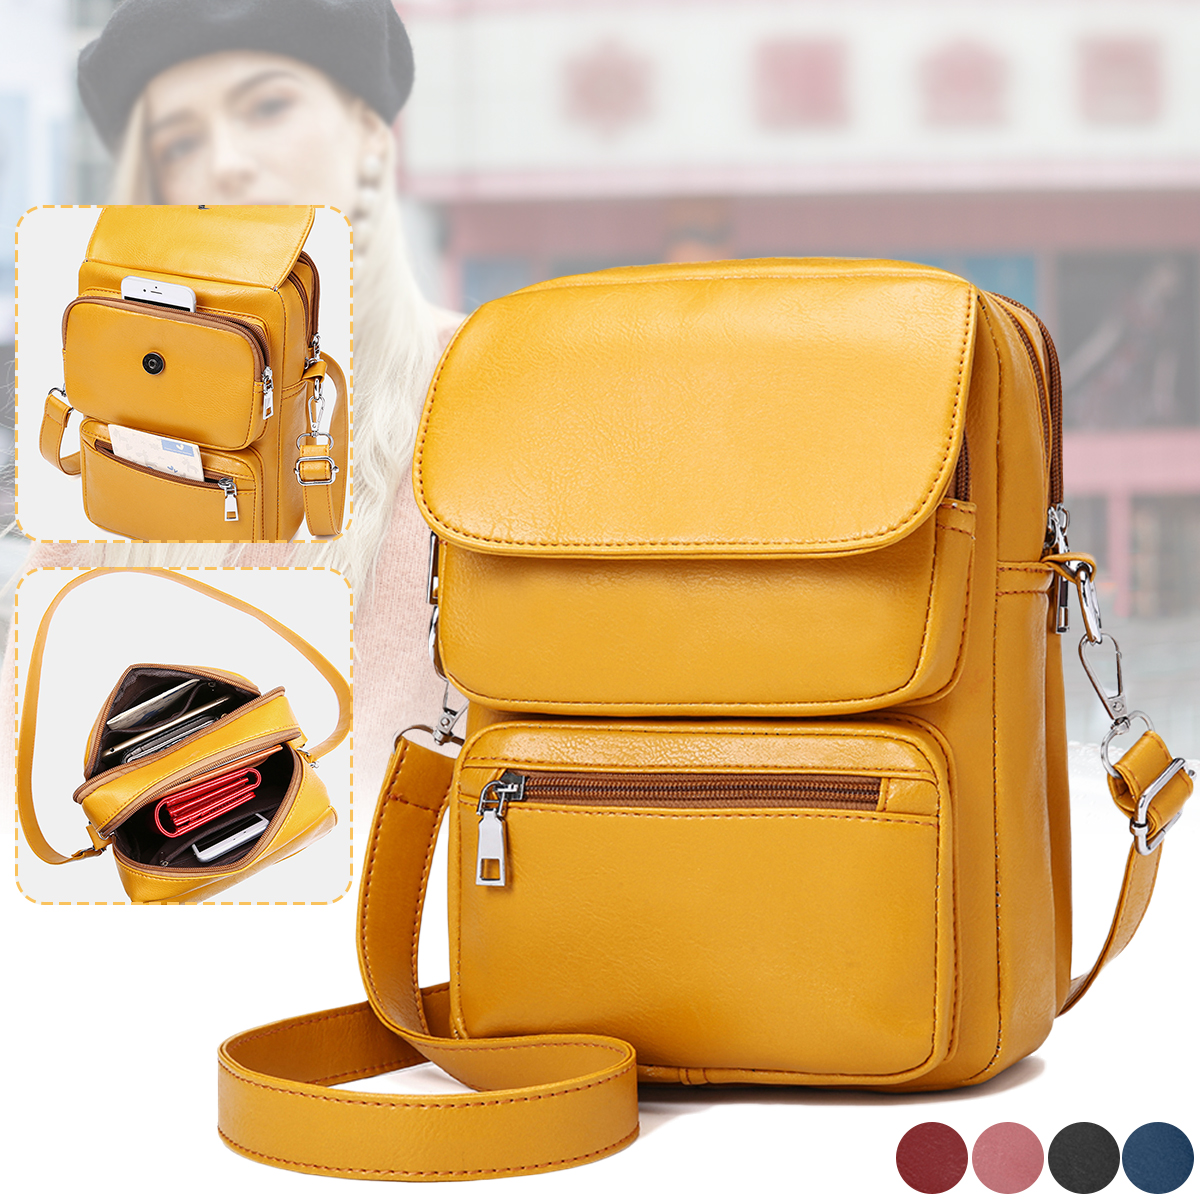 Fashion-Casual-Large-Capacity-with-Multi-Pocket-Mobile-Phone-Tablet-Storage-Crossbody-Shoulder-Bag-B-1642780-1